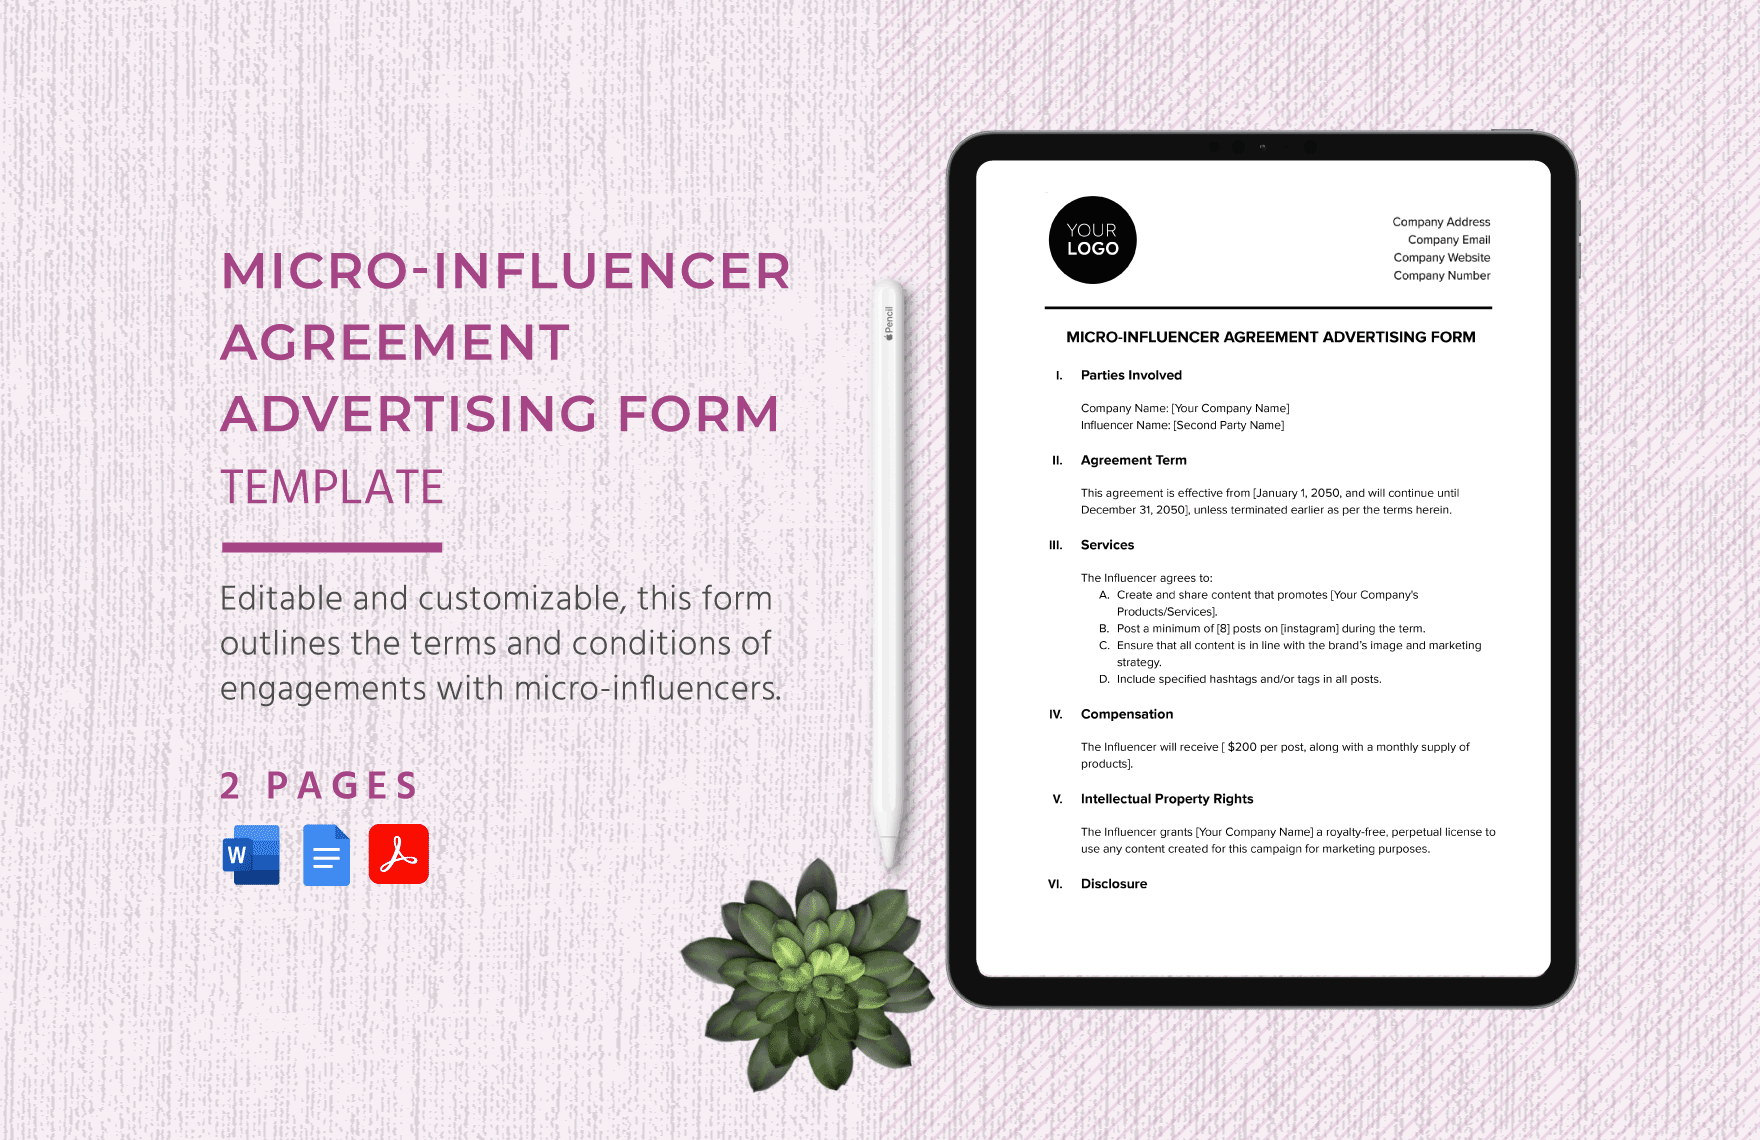 Micro-Influencer Agreement Advertising Form Template in Word, Google Docs, PDF